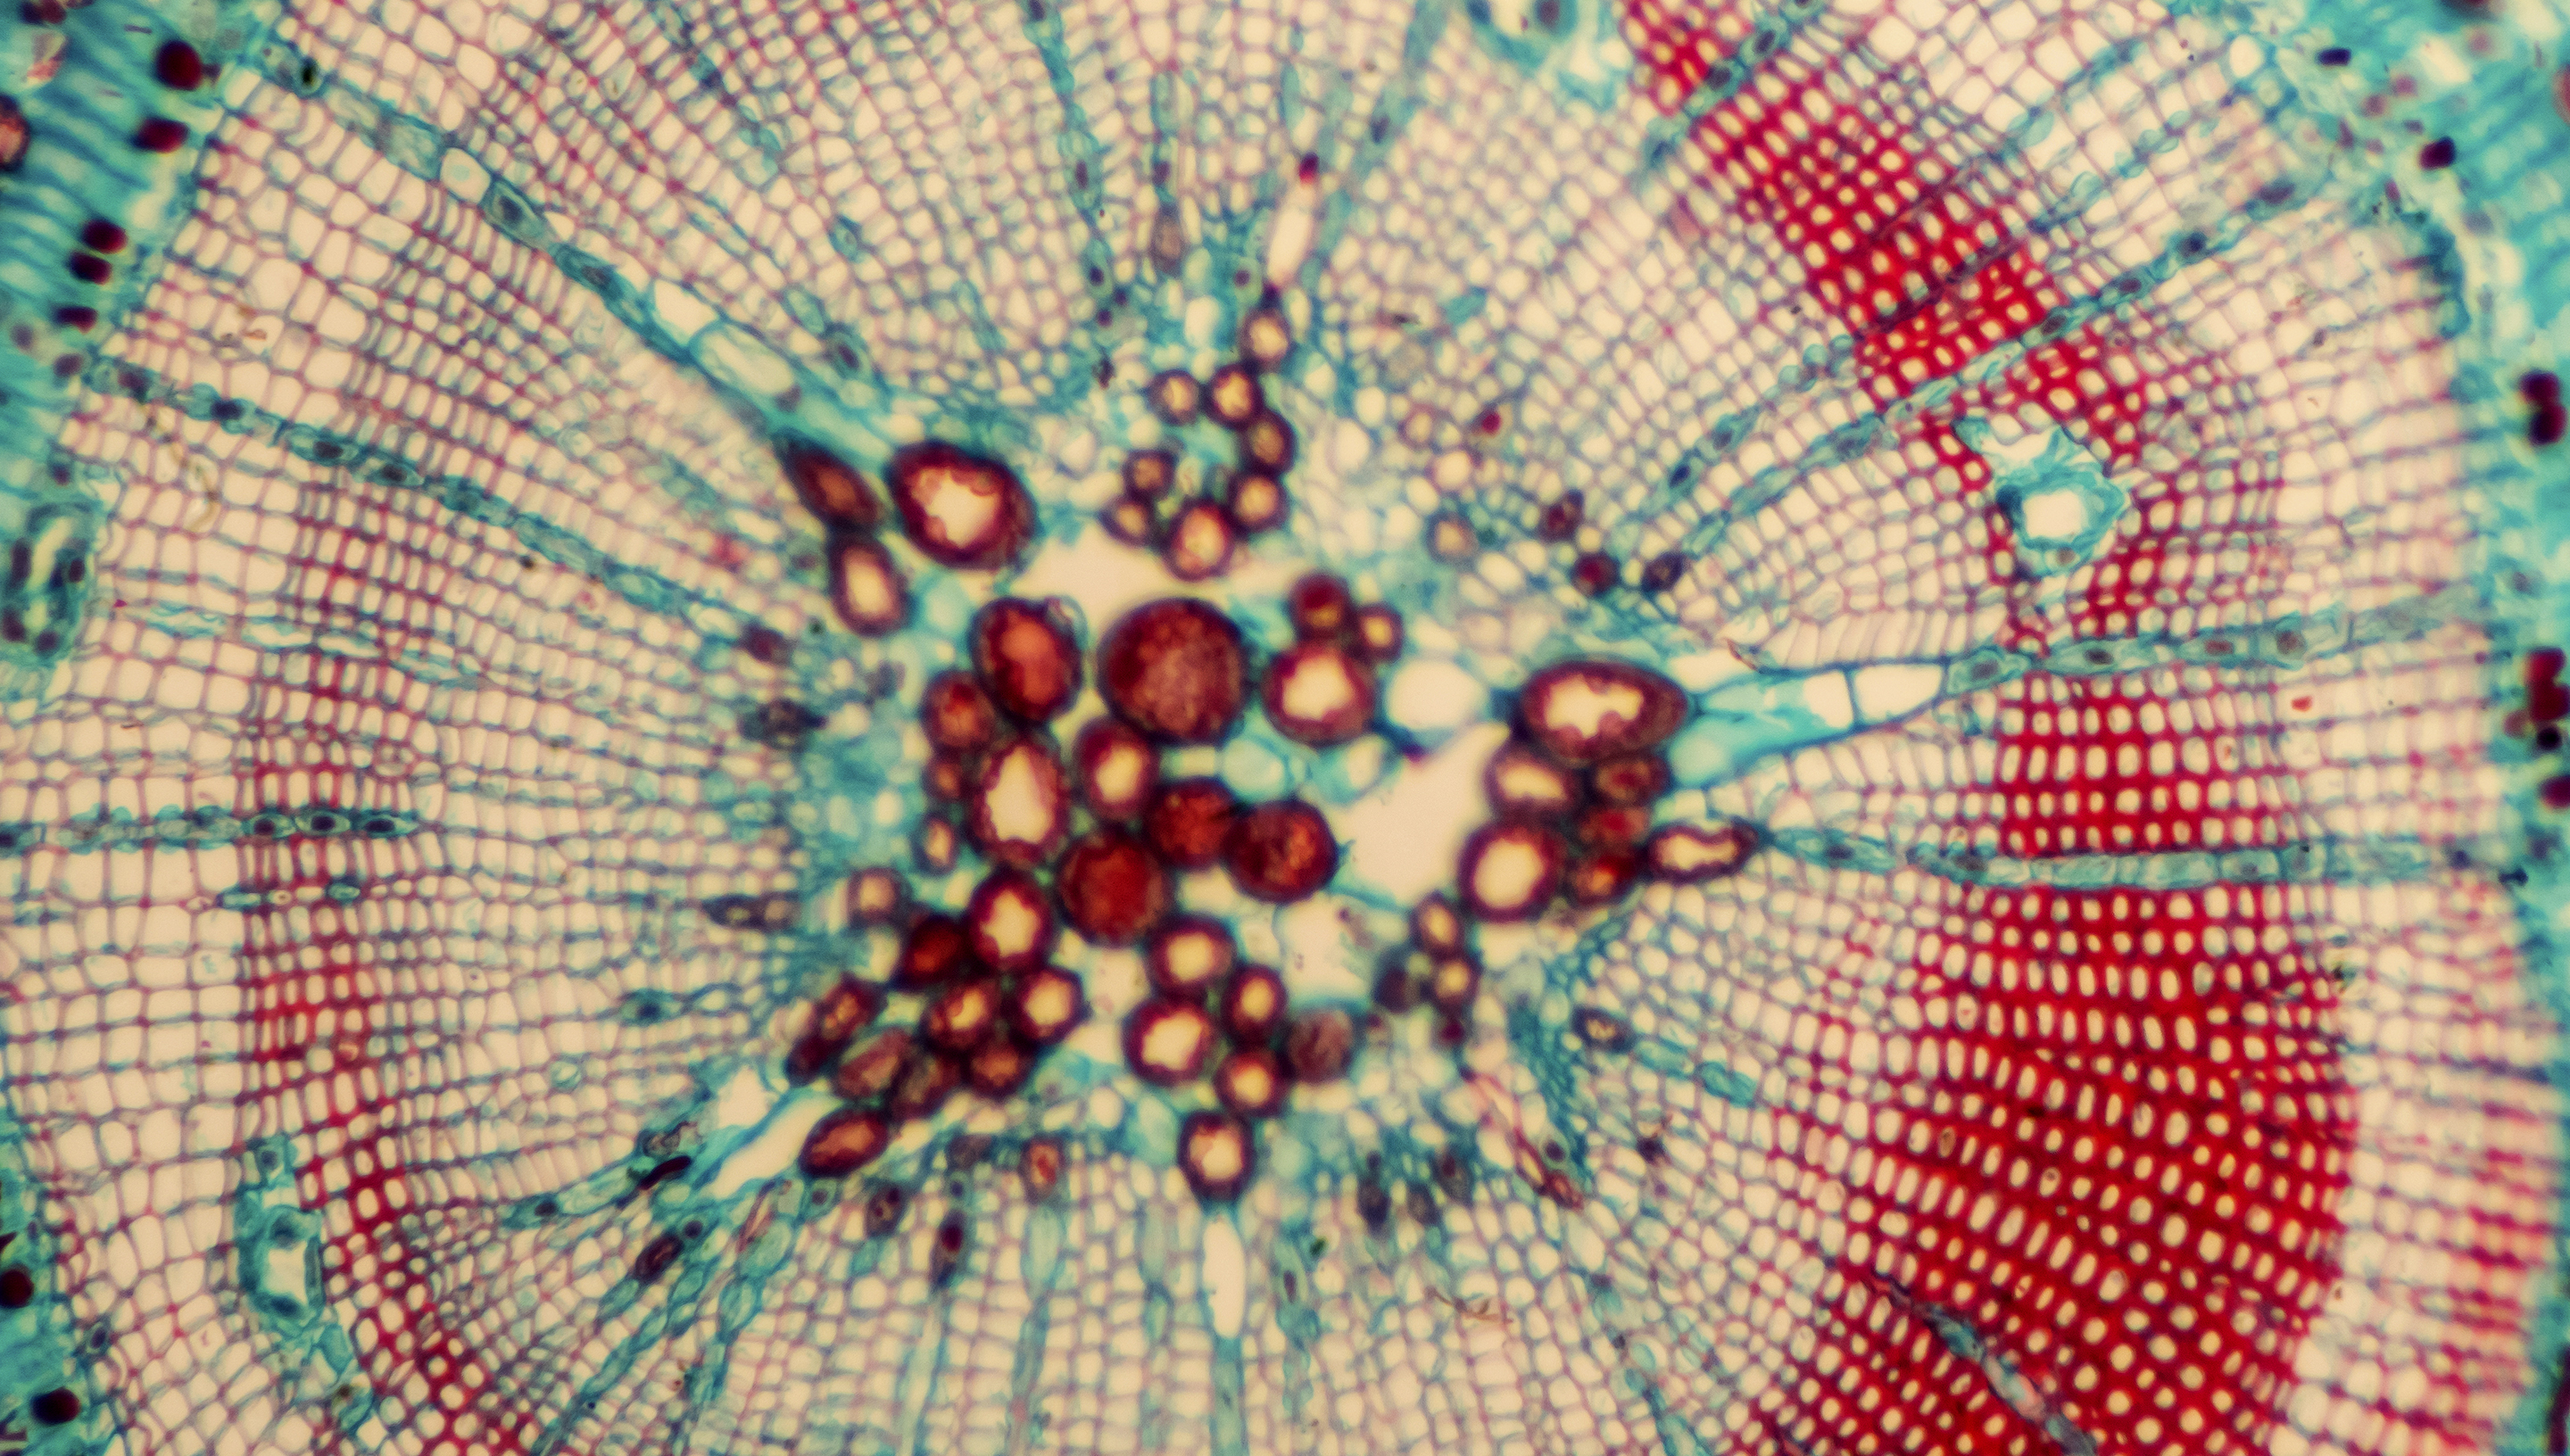 a group of cells viewed through a microscope